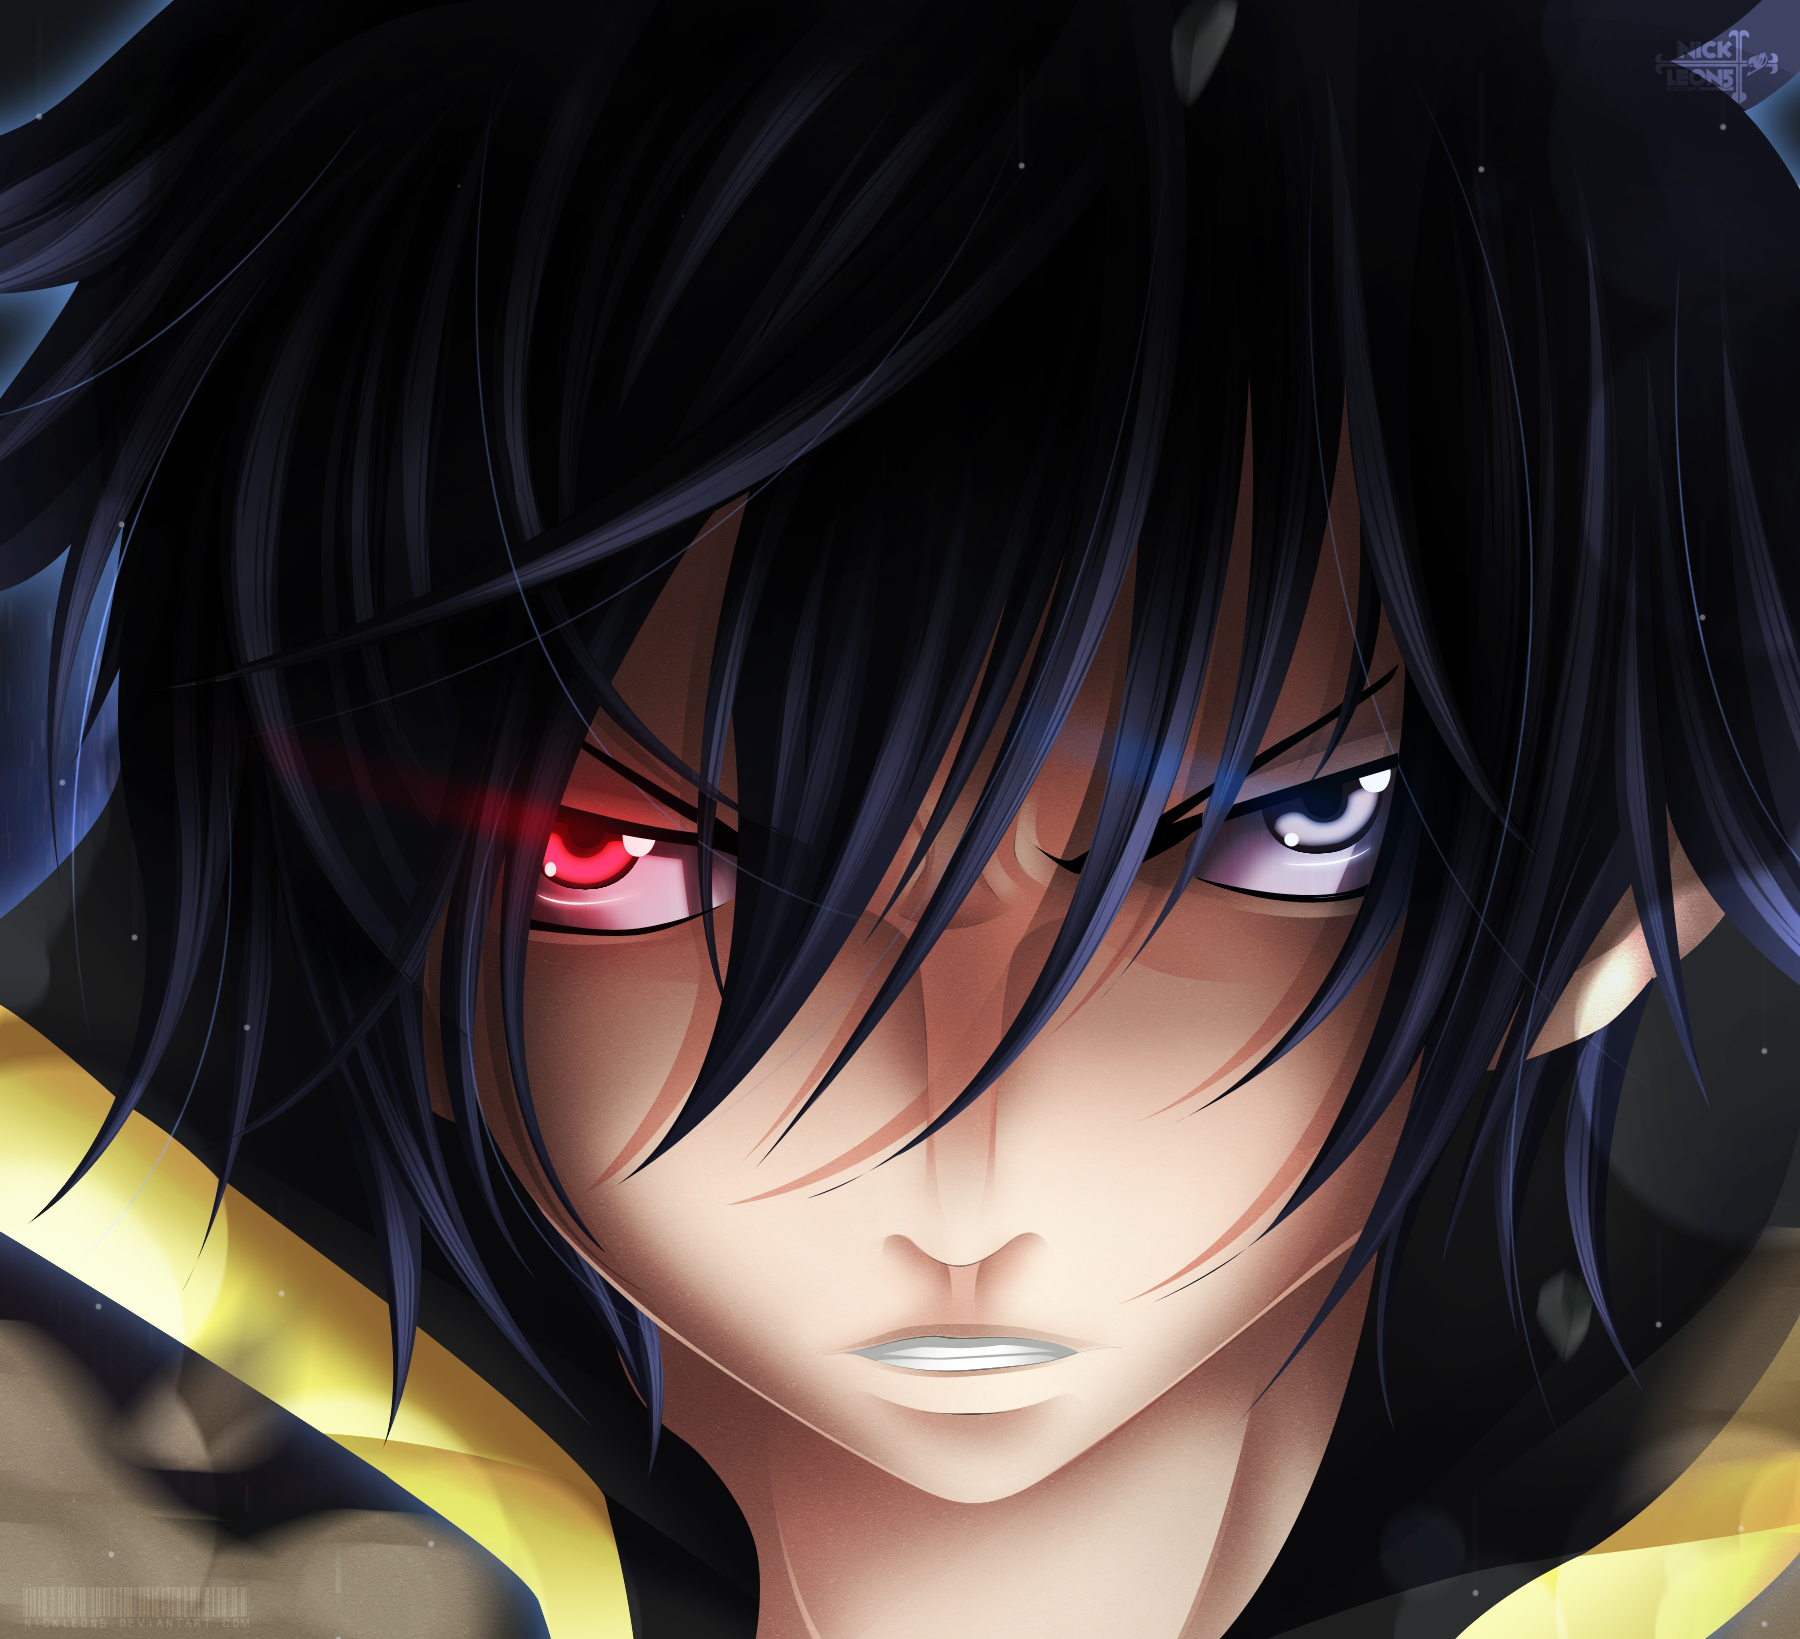 Gray Fullbuster Anime Fairy Tail Image